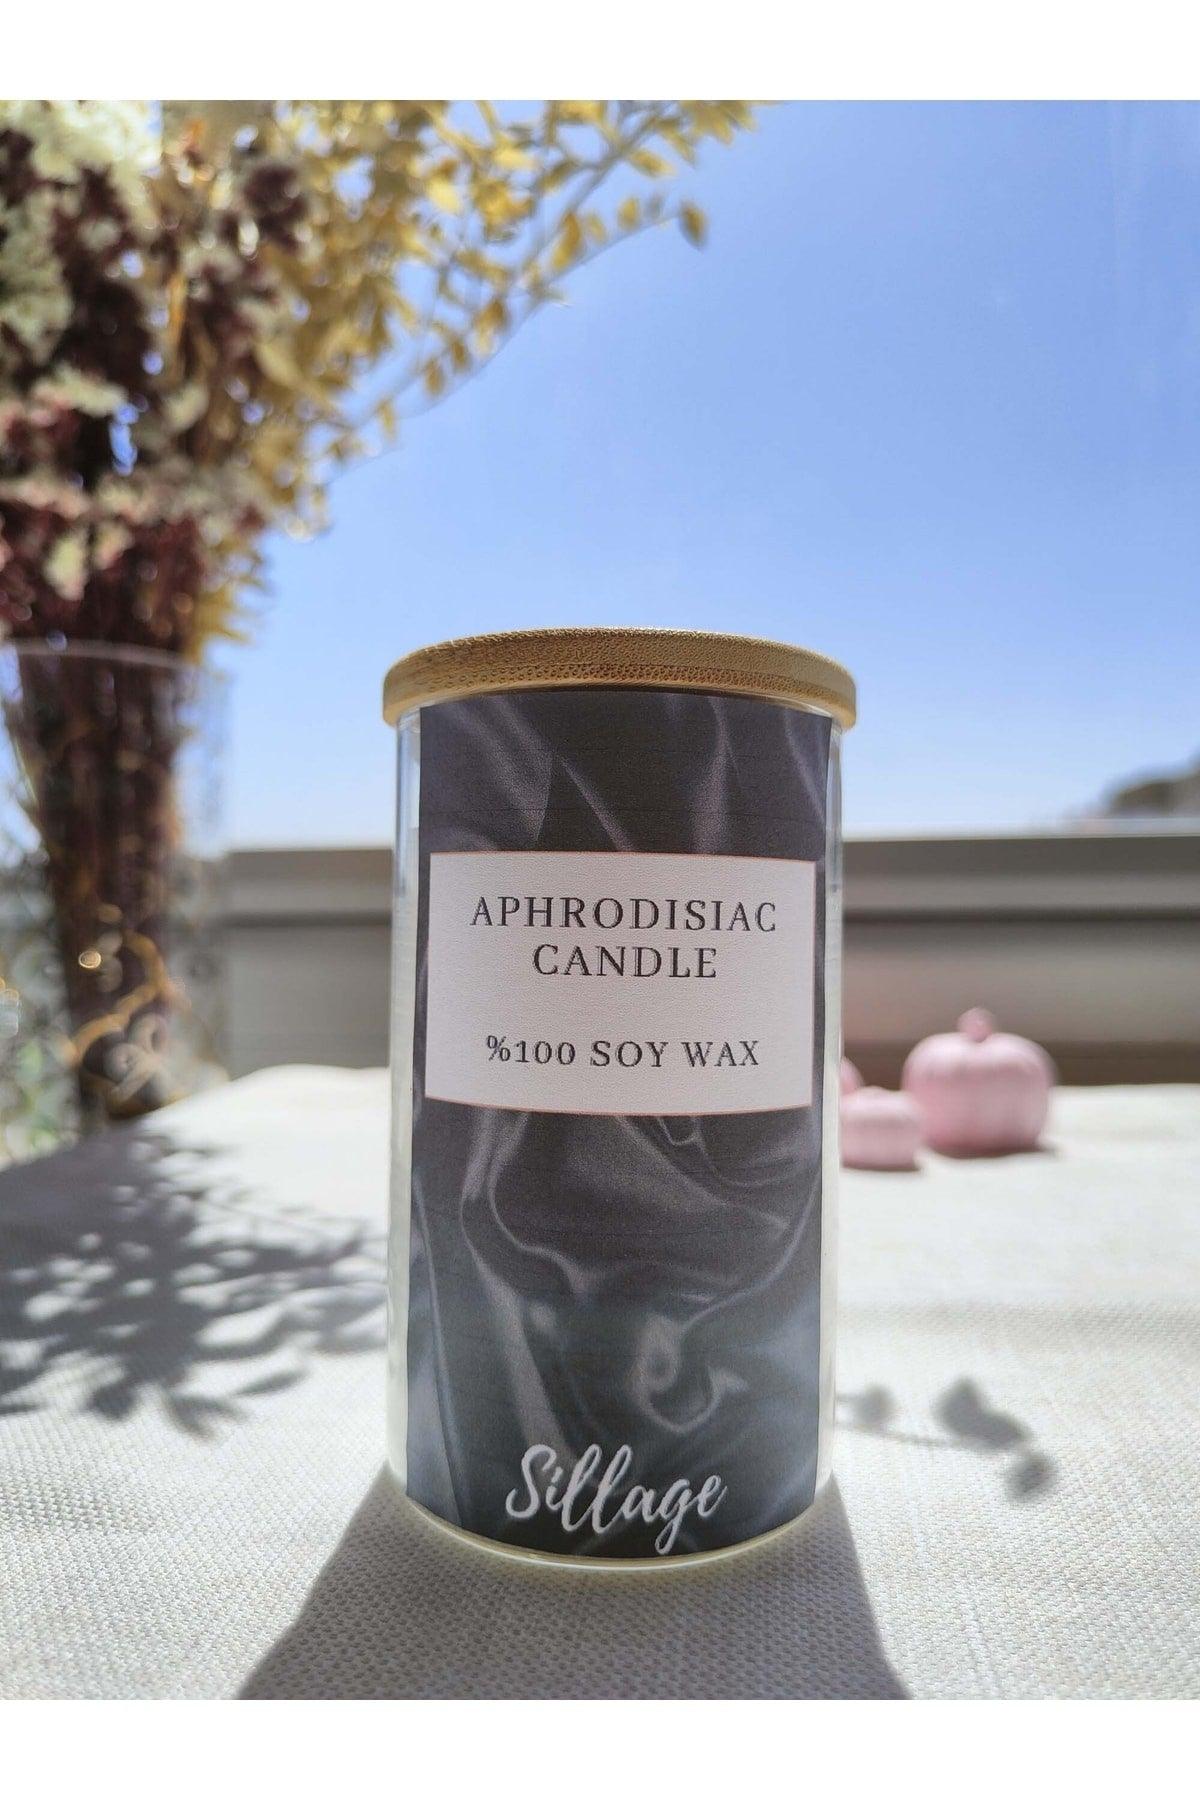 100% Soy Organic Therapy Candle with Aphrodisiac Luxury Scented Bamboo Lid - Swordslife